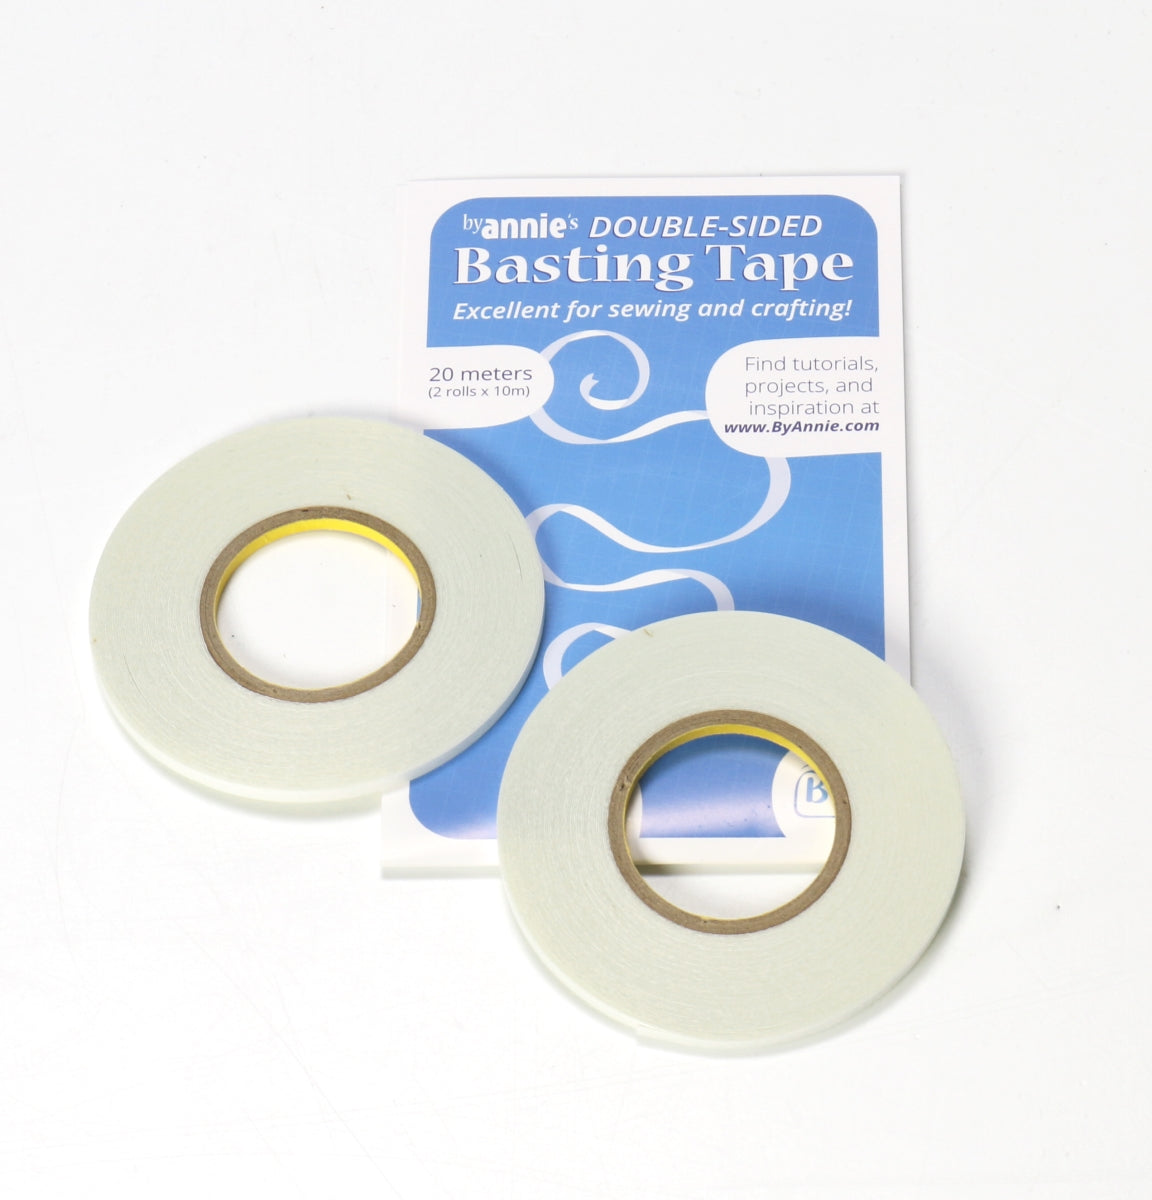 Dritz Wash-Away Wonder Tape - The Sewing Collection